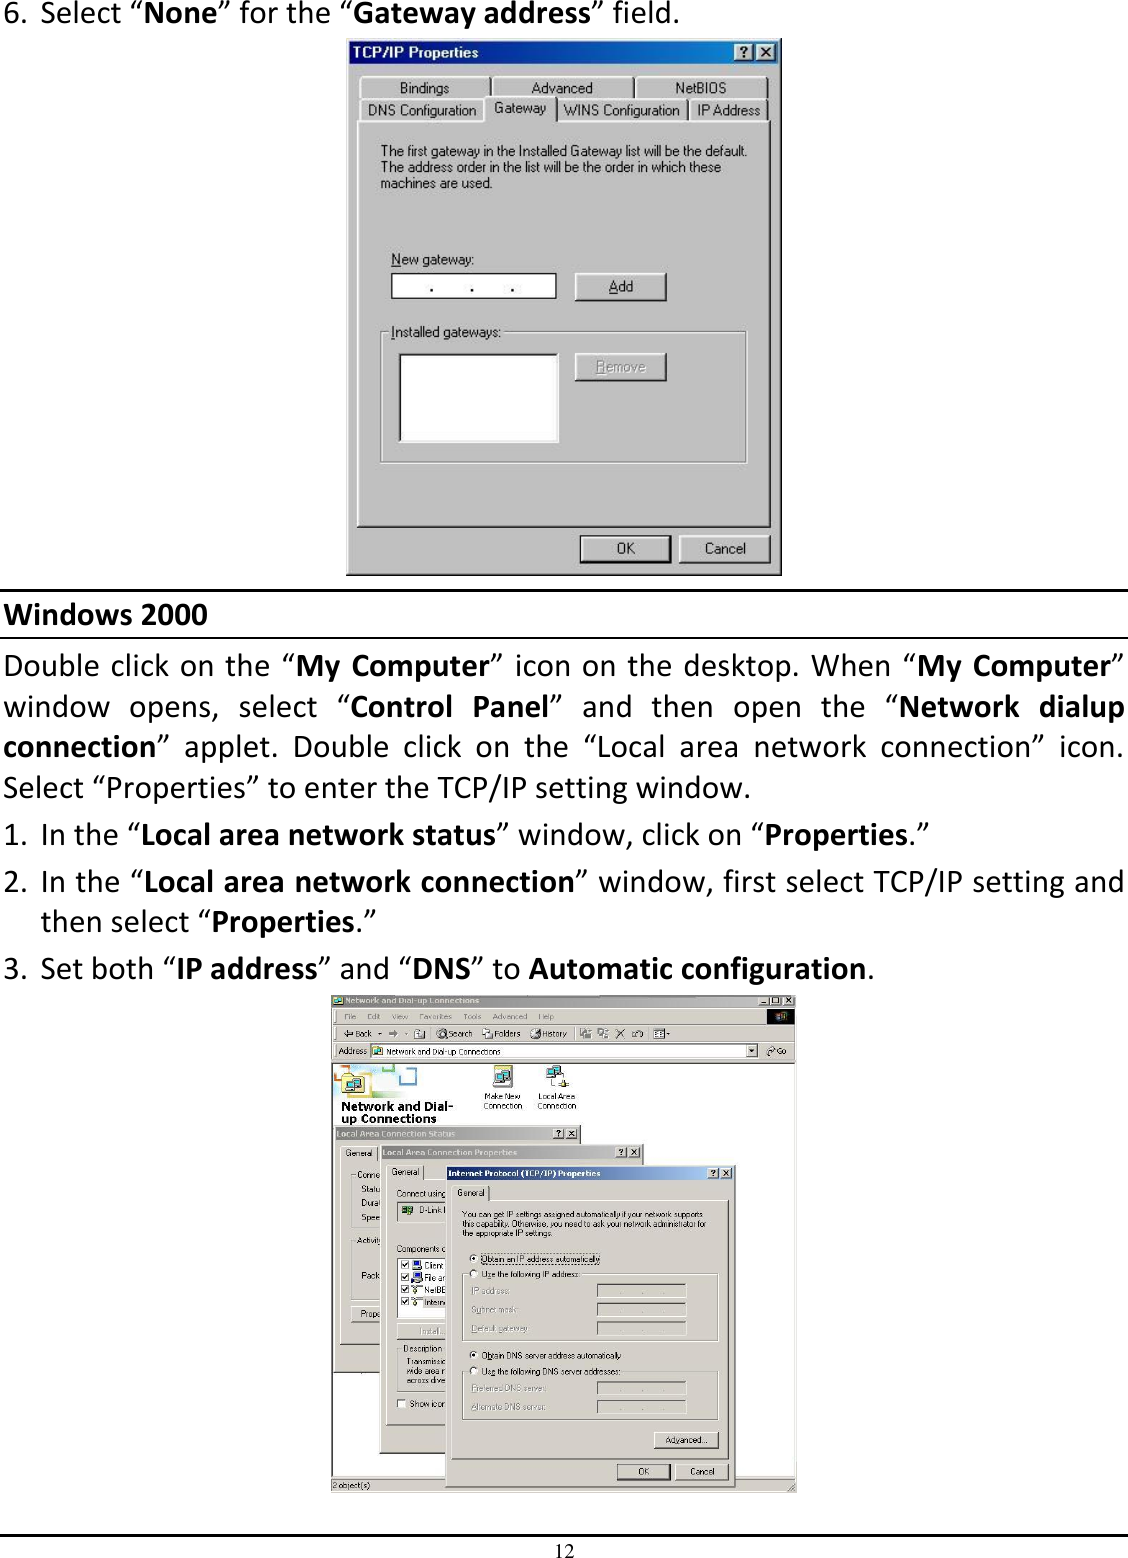 12 6. Select “None” for the “Gateway address” field.  Windows 2000 Double click on the “My  Computer” icon on the desktop. When “My  Computer” window  opens,  select  “Control  Panel”  and  then open  the  “Network  dialup connection”  applet.  Double  click  on  the  “Local  area  network  connection”  icon. Select “Properties” to enter the TCP/IP setting window. 1. In the “Local area network status” window, click on “Properties.” 2. In the “Local area network connection” window, first select TCP/IP setting and then select “Properties.” 3. Set both “IP address” and “DNS” to Automatic configuration.  